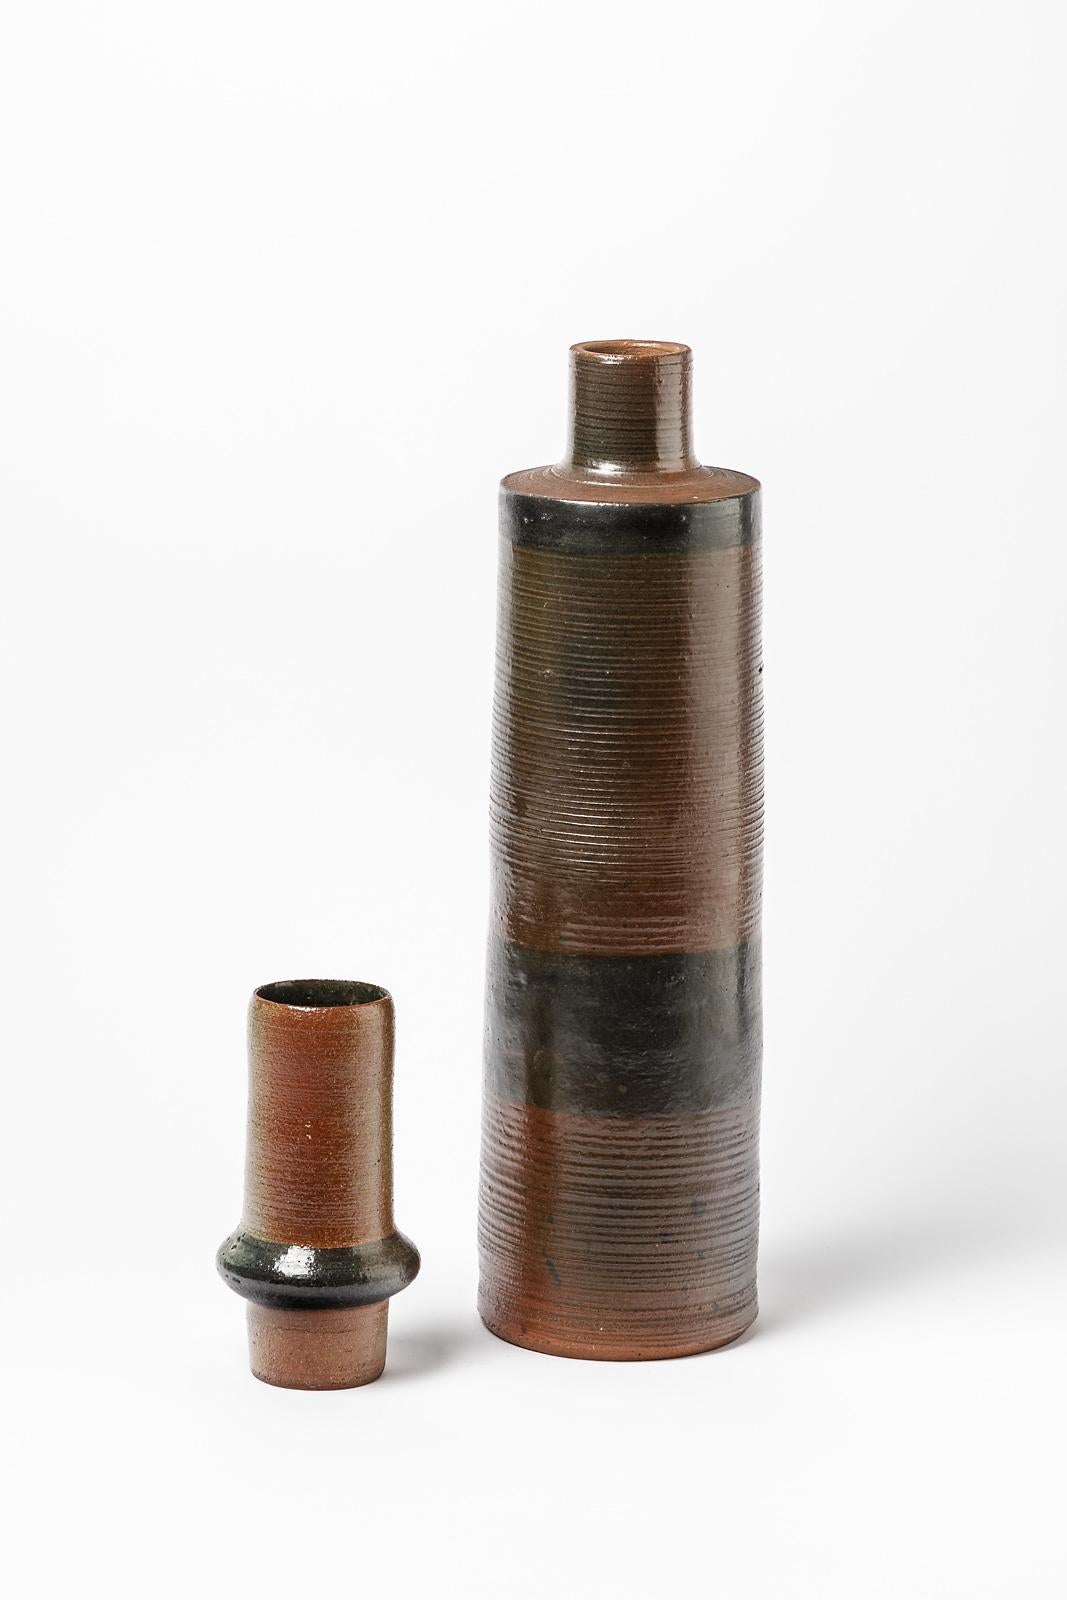 20th Century Black and Brown XXth Century Stoneware Ceramic Vase by Nicole Giroud 1970 Design For Sale